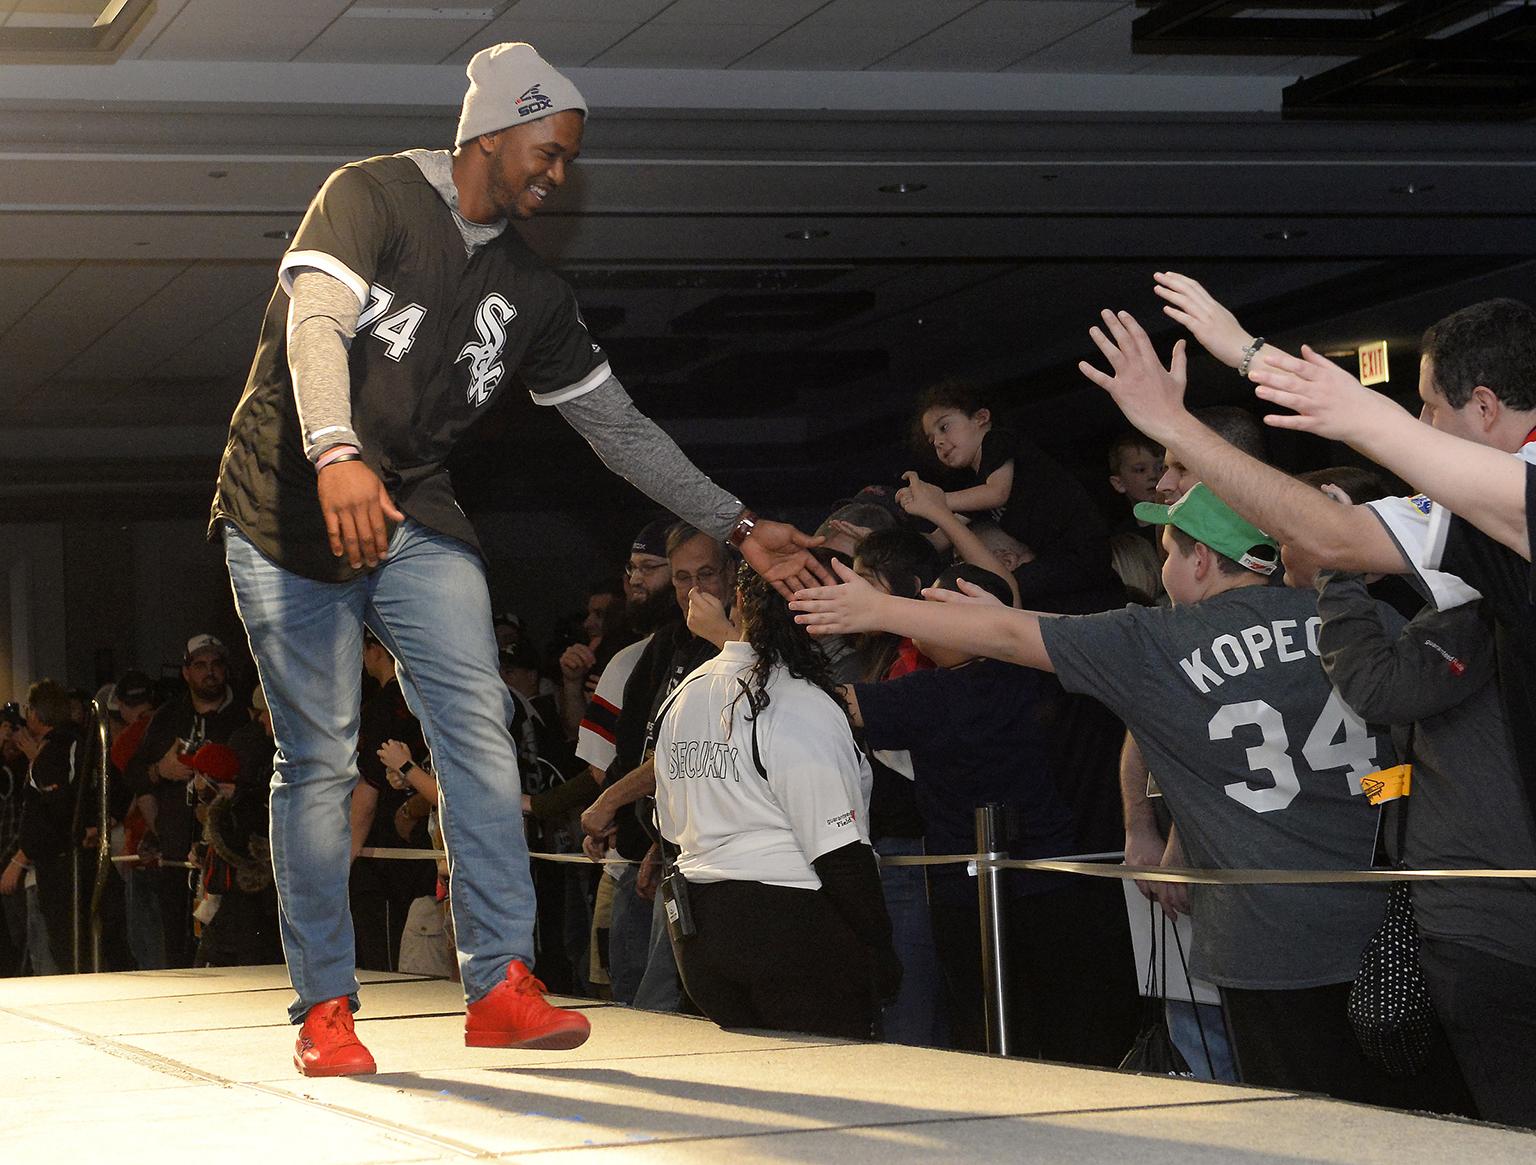 Eloy Jimenez greets fans at SoxFest in January. (Ron Vesely / Chicago White Sox)